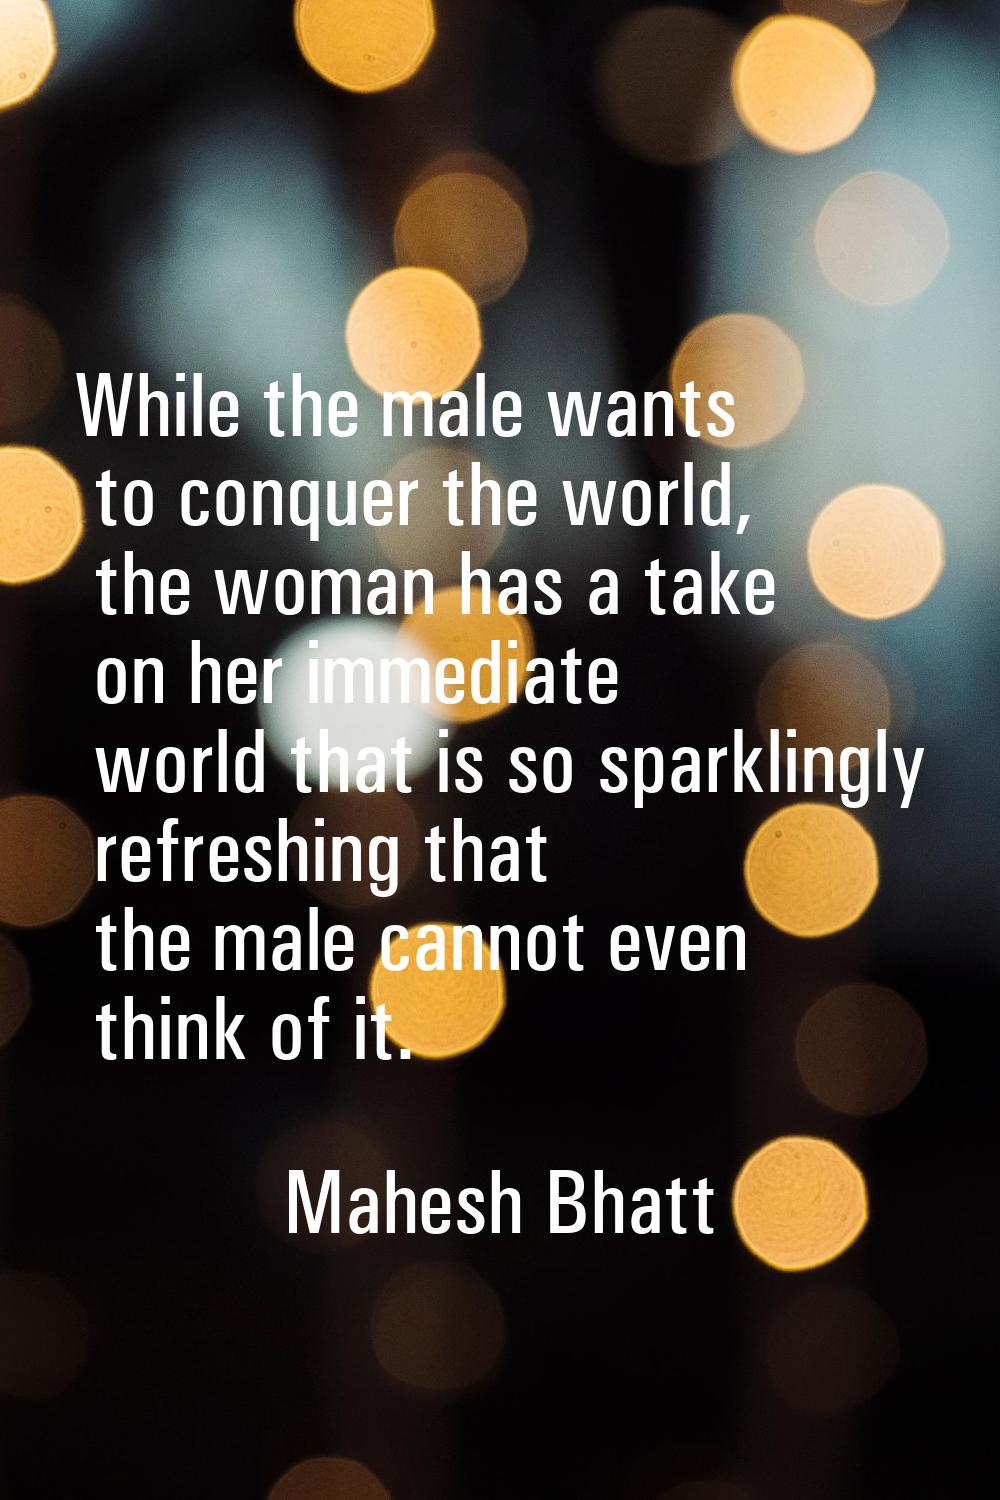 While the male wants to conquer the world, the woman has a take on her immediate world that is so s